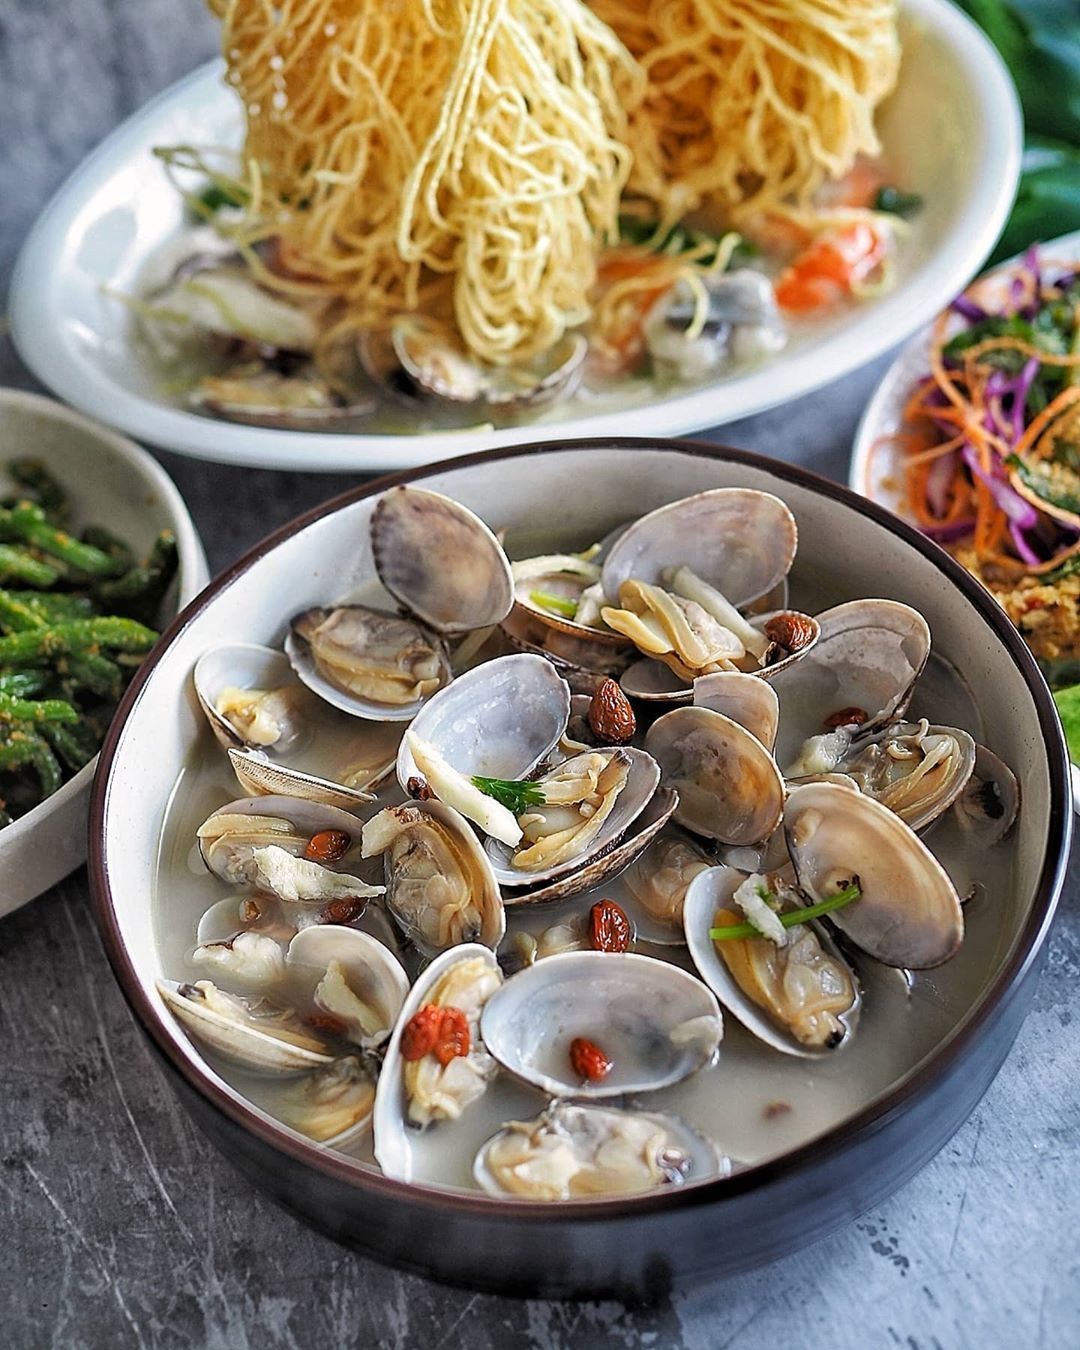 Sweet Clams in Superior Broth 高汤拉拉